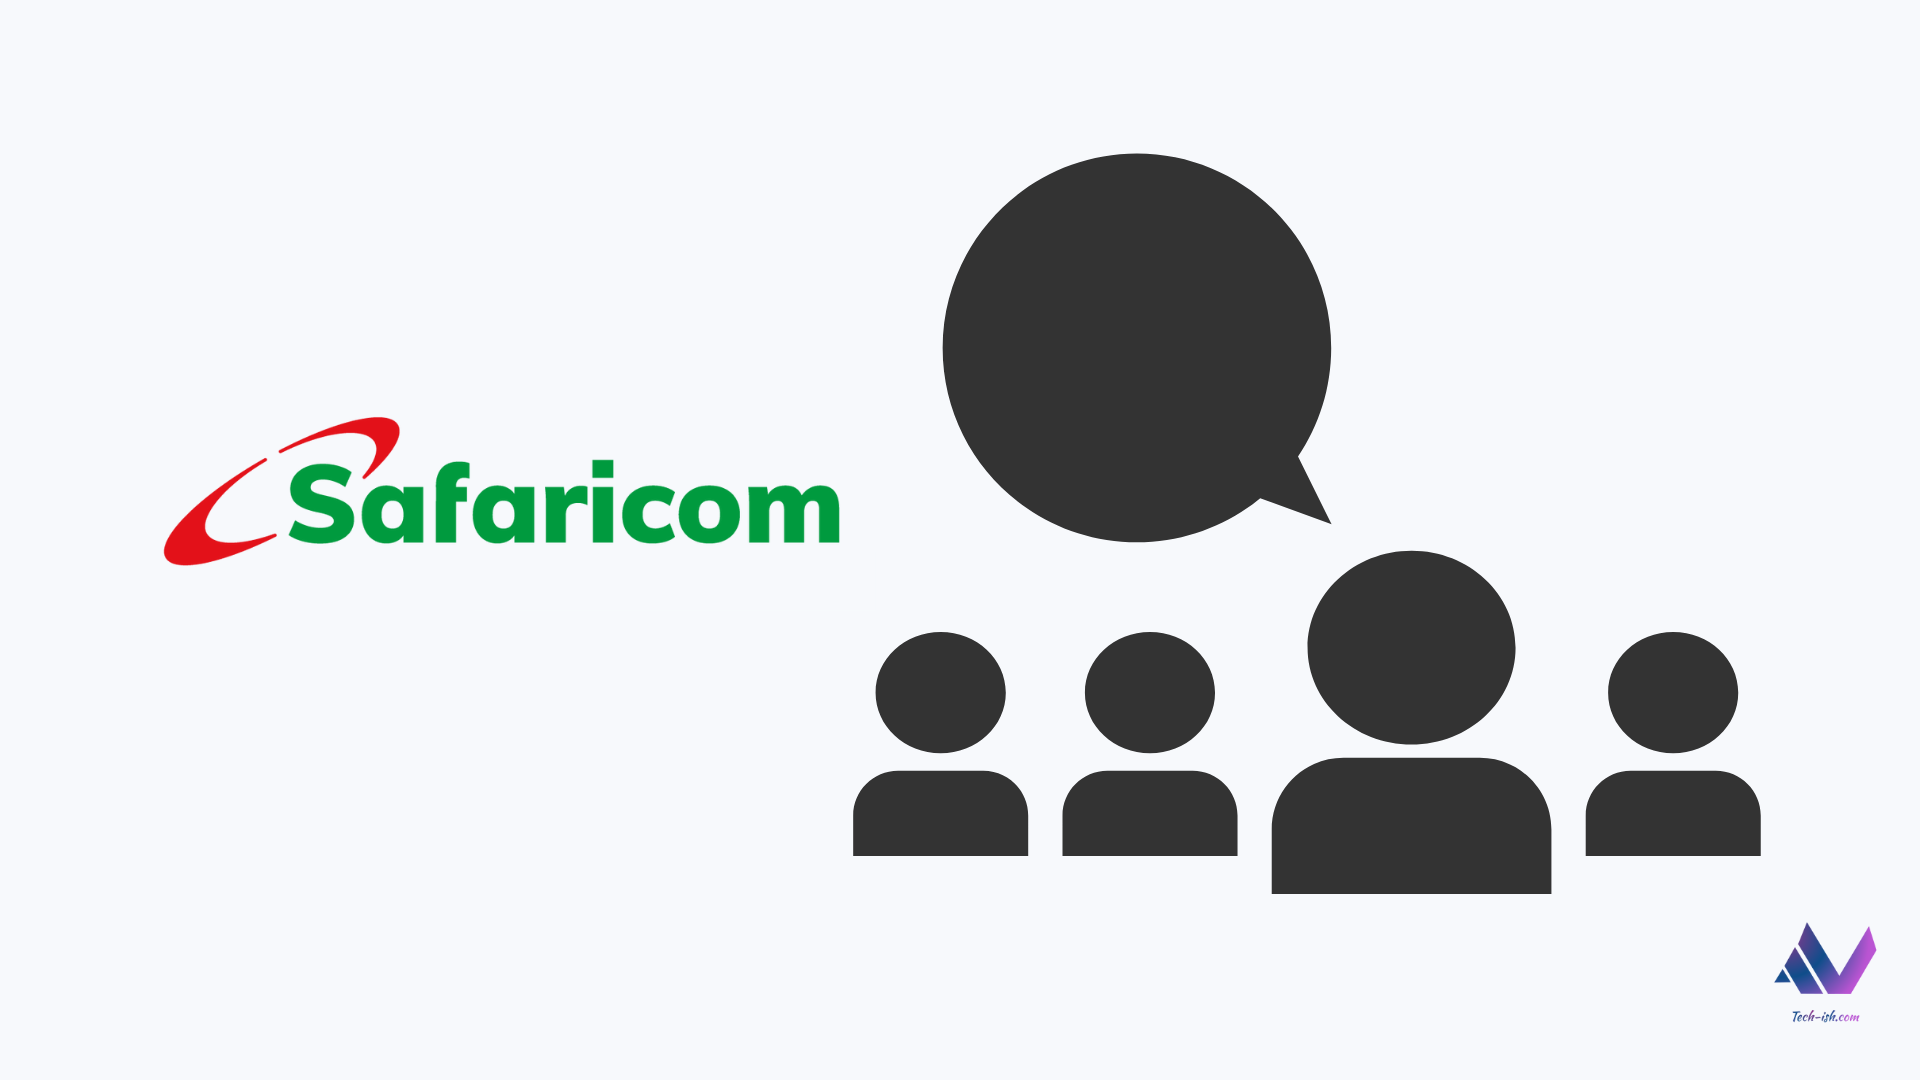 How to consult with Safaricom for Digital Solutions for your Business